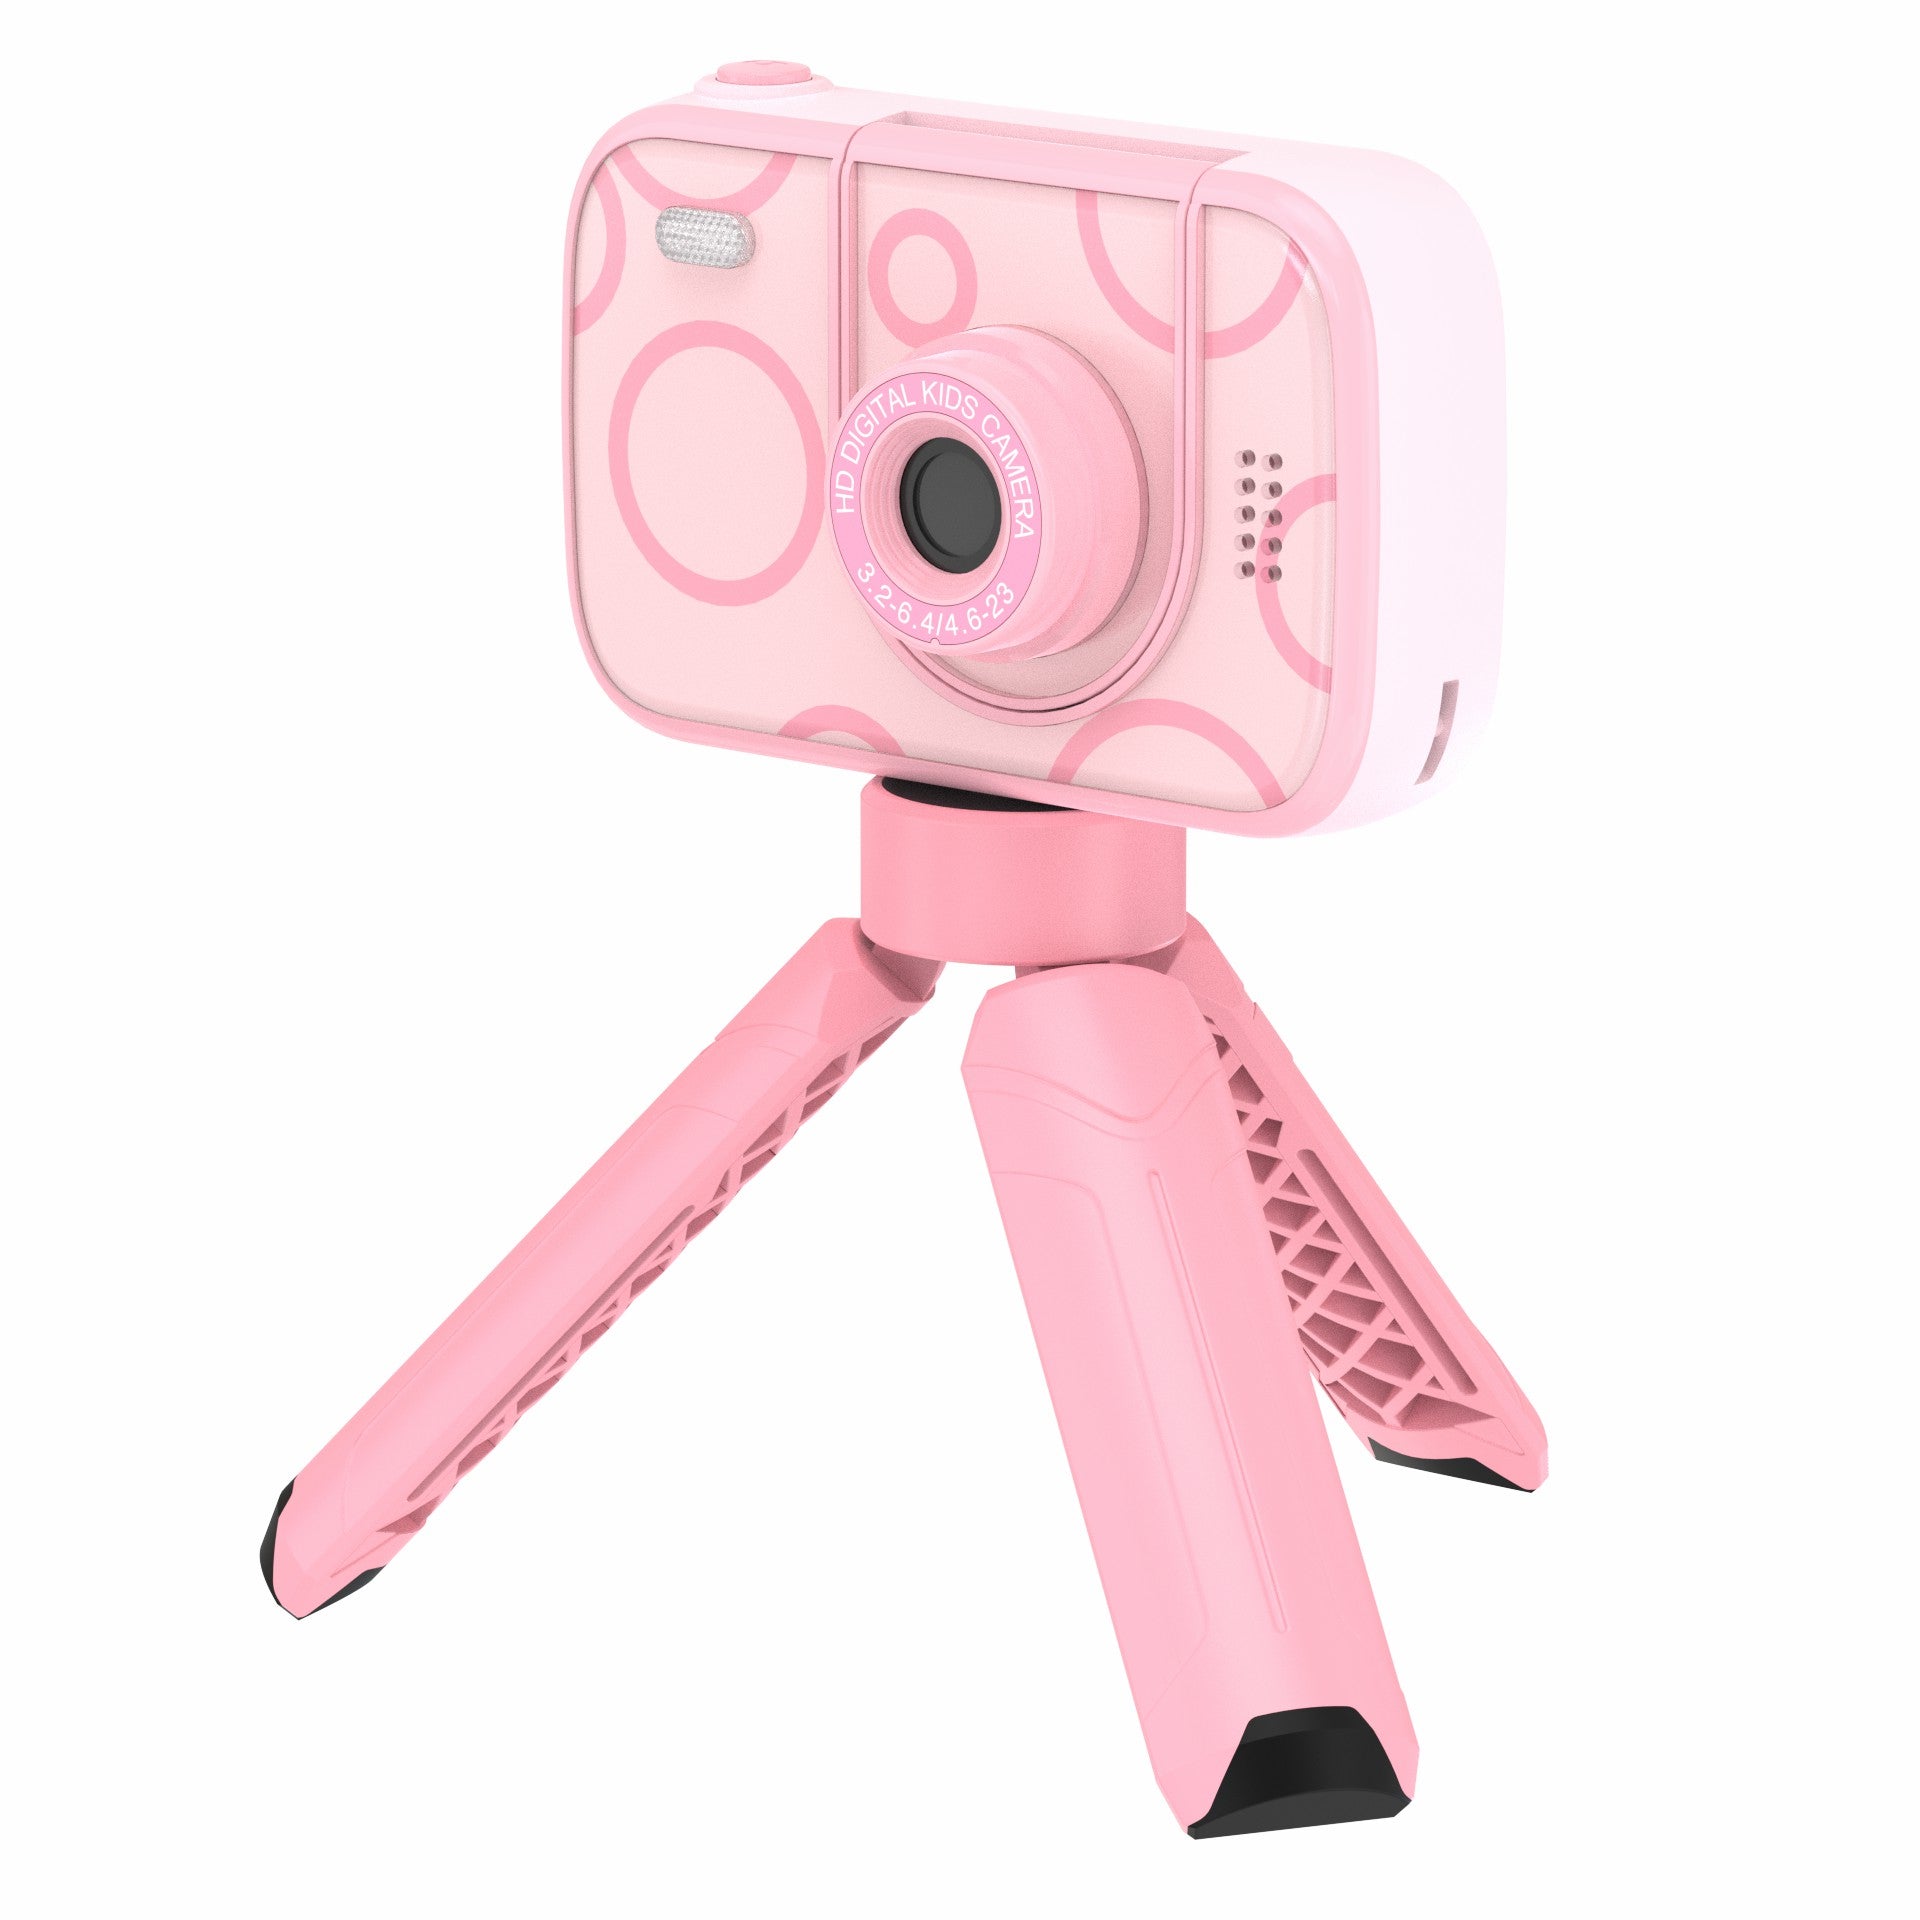 H19 2.4 inch Screen Children Camera 180-Degree Flip Camera Len with Tripod, Support 32G Memory Card - Pink